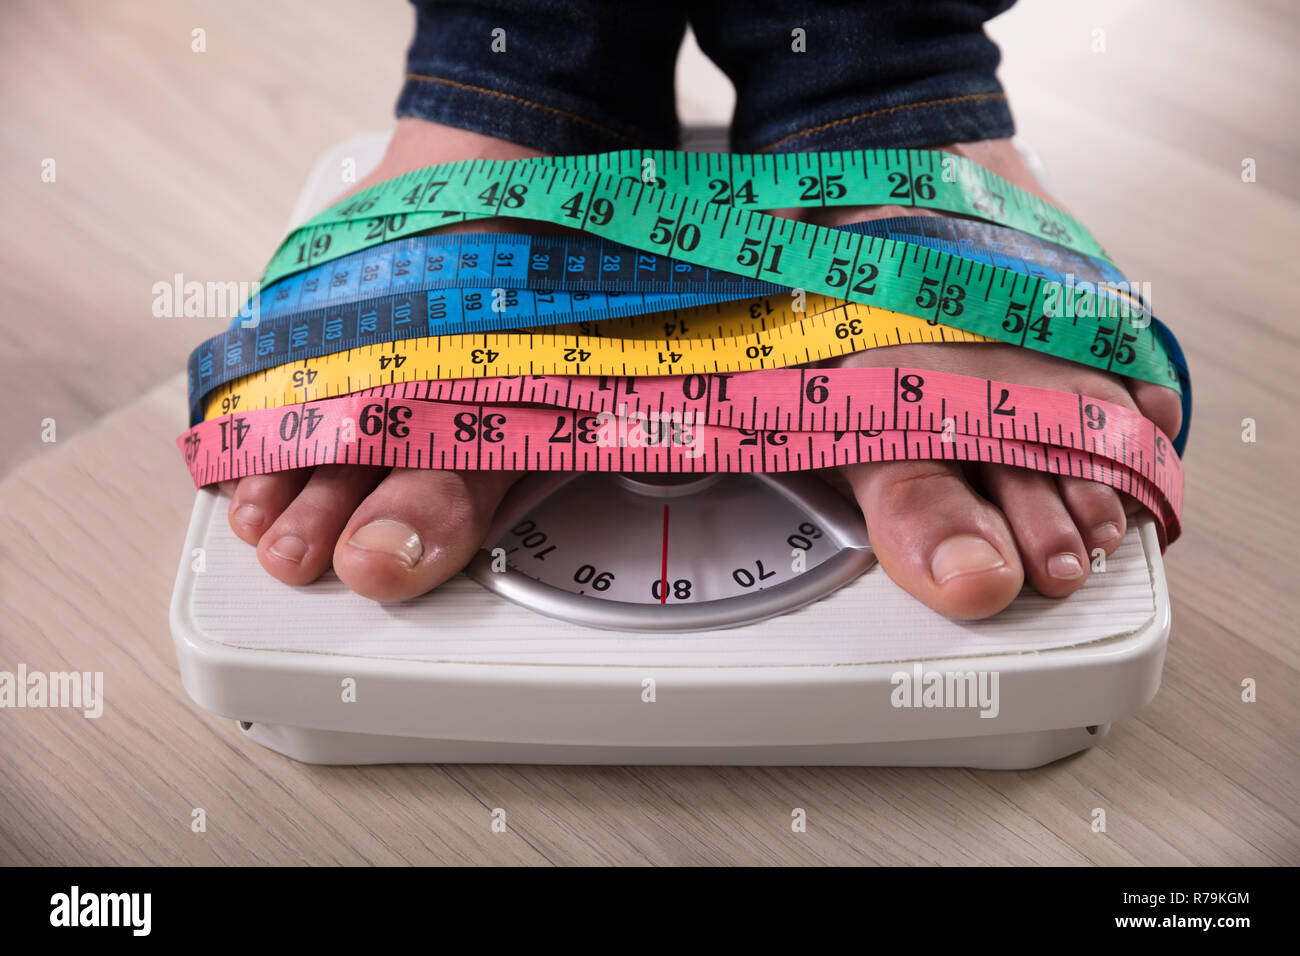 https://c8.alamy.com/comp/R79KGM/persons-feet-on-weight-scale-wrapped-with-measuring-tape-R79KGM.jpg